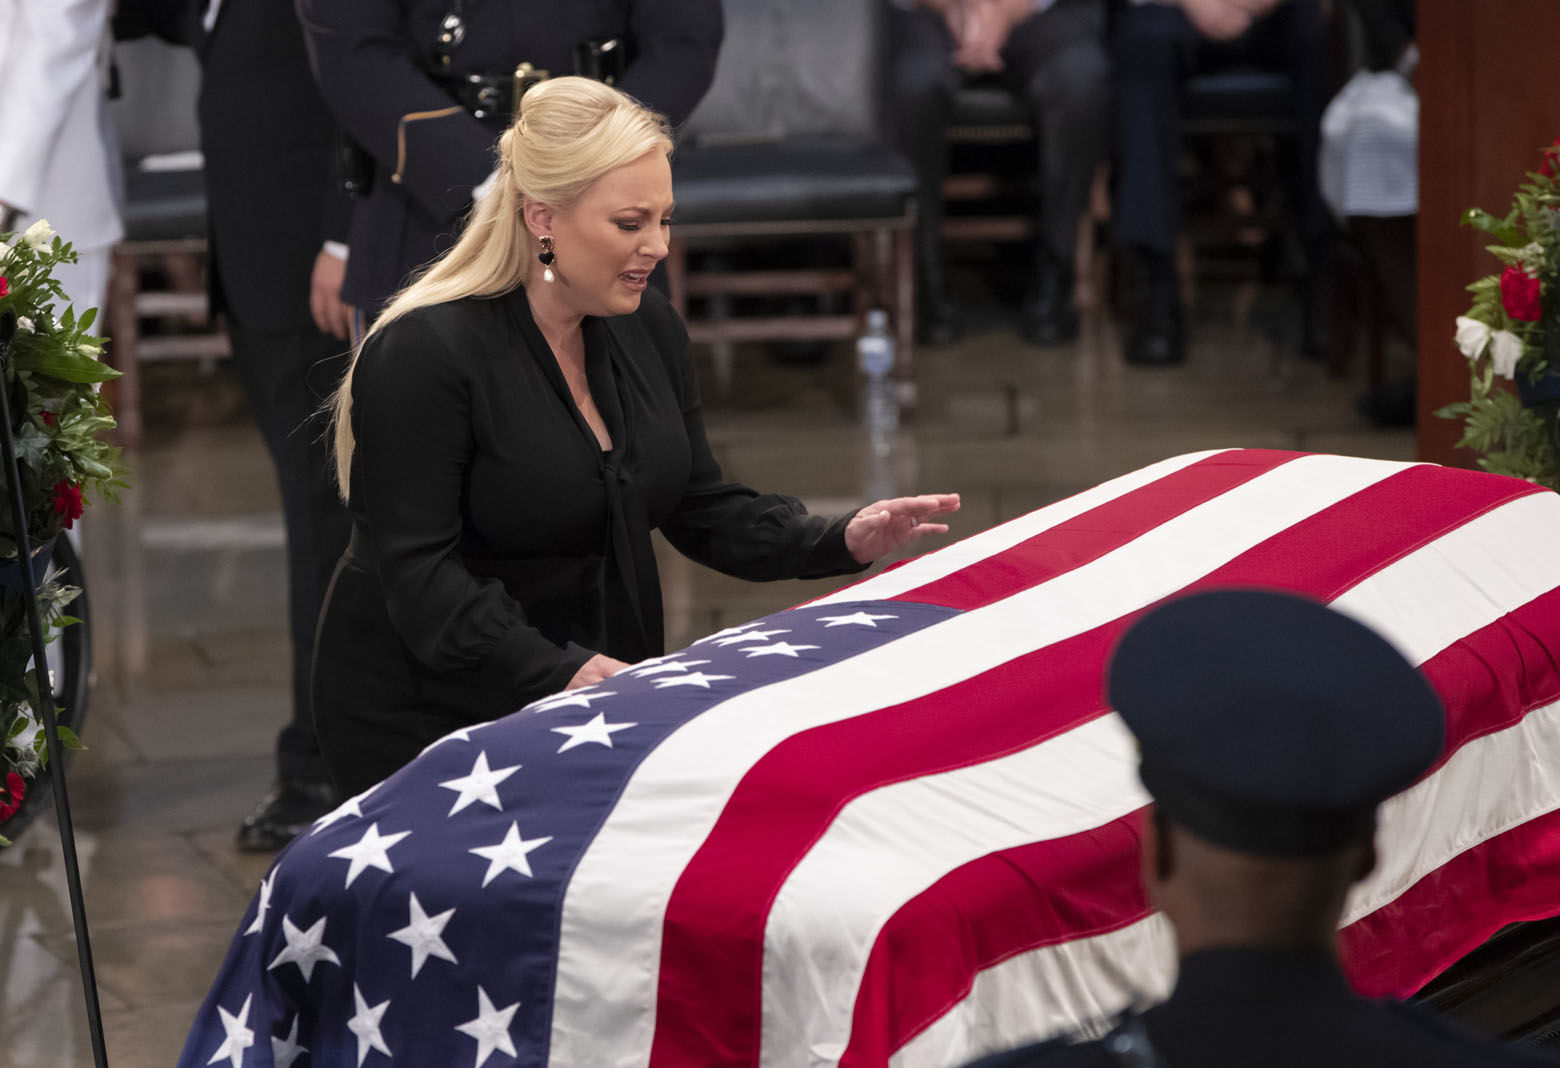 Meghan McCain reaches out to touch the flag-draped casket bearing the remains of her father, Sen. John McCain, R-Ariz., during a farewell ceremony in the Capitol Rotunda, Friday, Aug. 31, 2018, in Washington.  (AP Photo/J. Scott Applewhite)